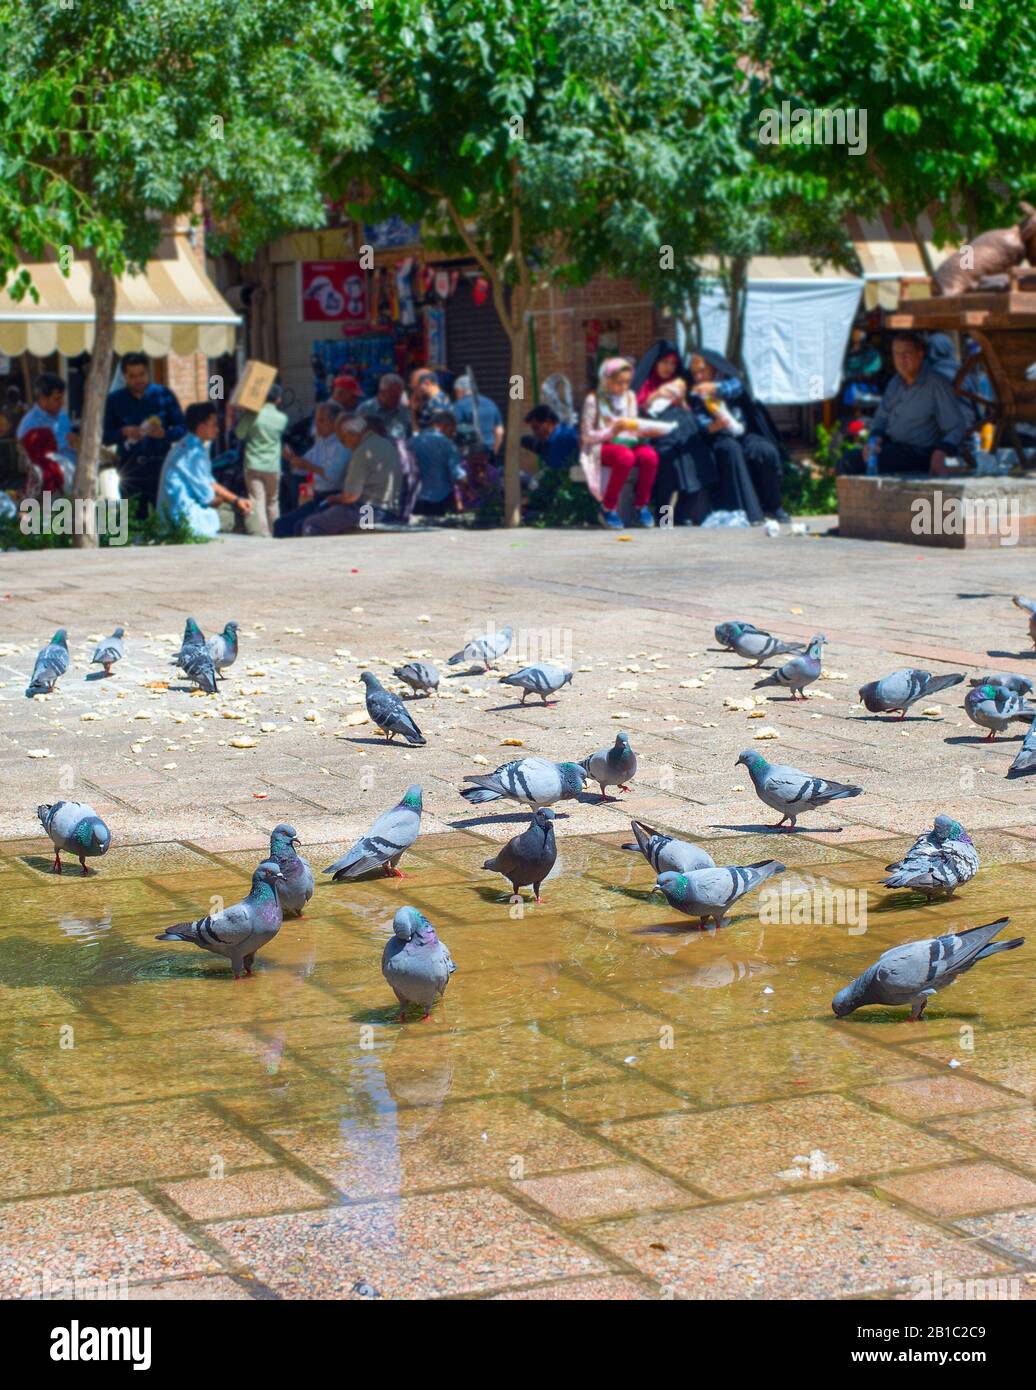 Pigeons bathing in a puddle on a central square of Tehran, Iran Stock Photo